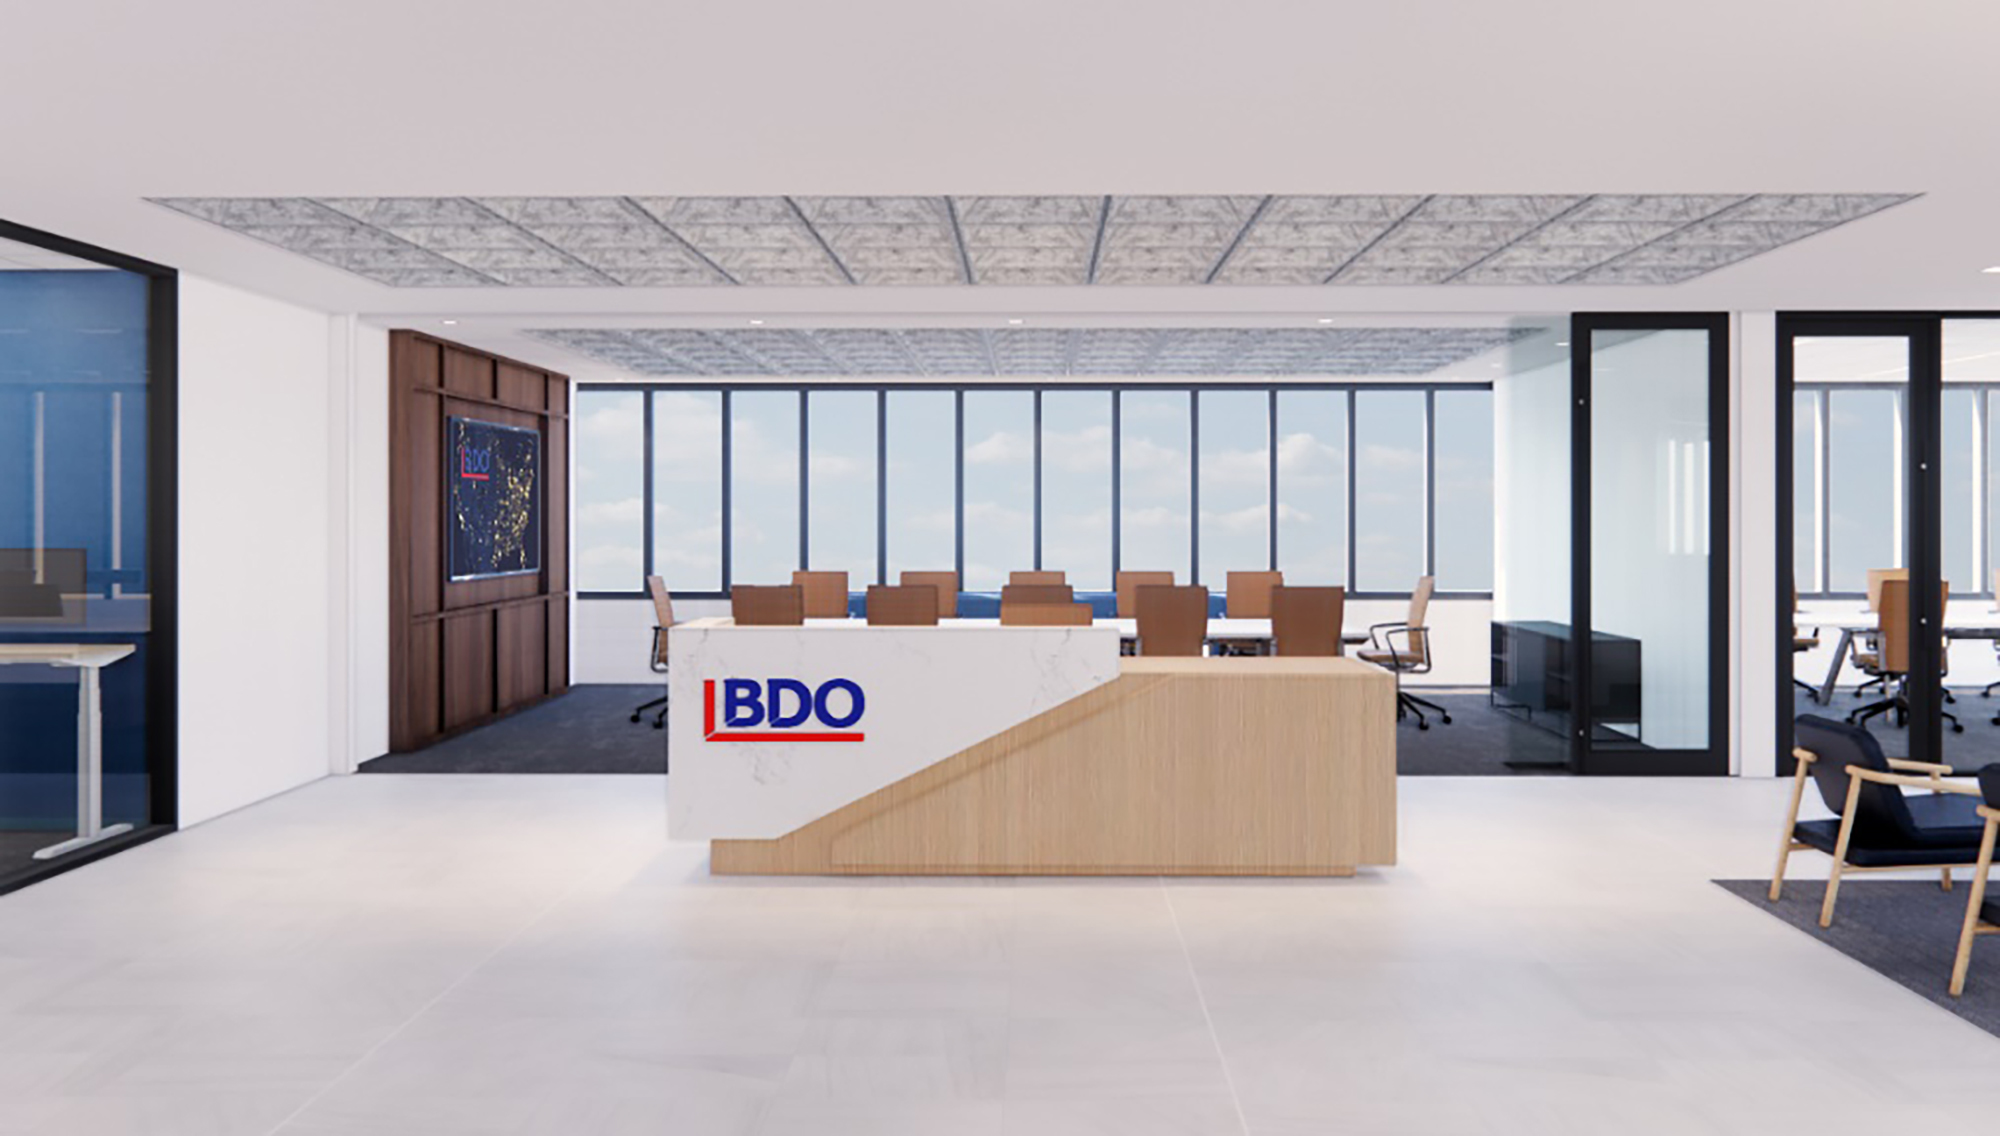 BDO will occupy a full floor at the 28-story Riverplace Tower.